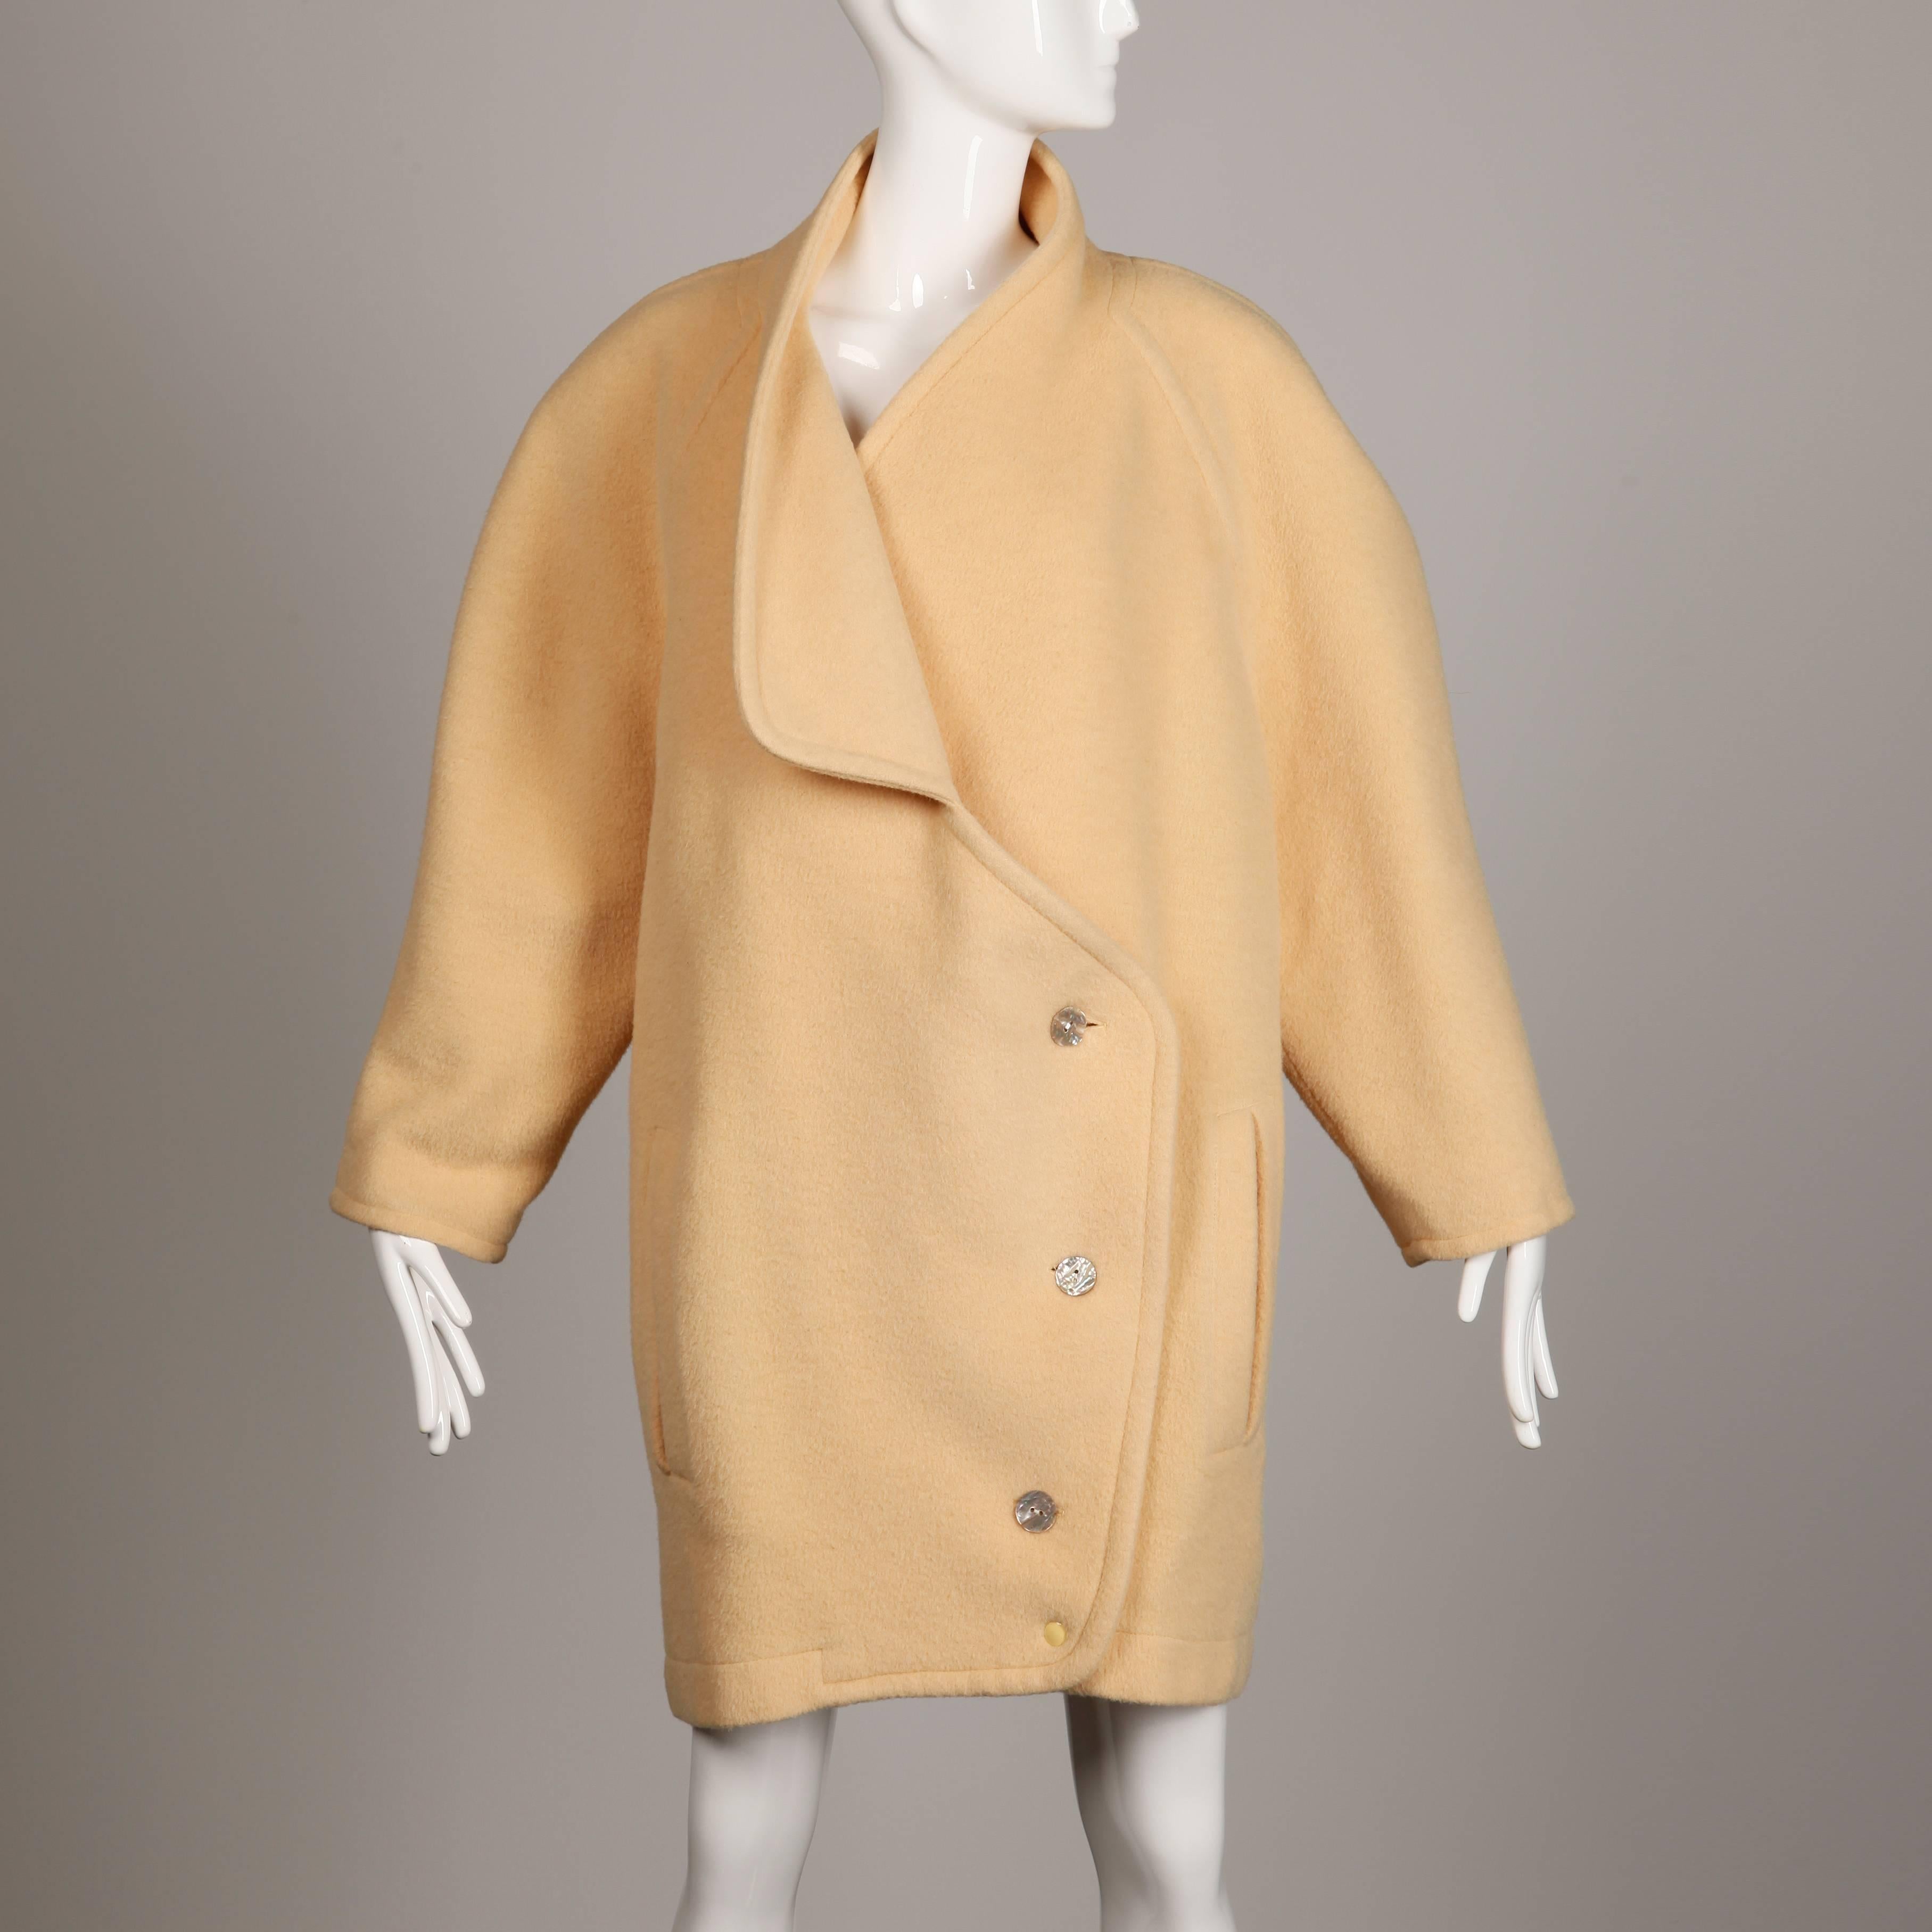 Unique vintage wool coat by Claude Montana from the 1980s. Oversized boxy shape and asymmetric cut. Partially lined with front shell button closure. The fabric content is 50% llama, 30% wool, and 20% cashmere. The marked size is US 8, I 42, F 40, D